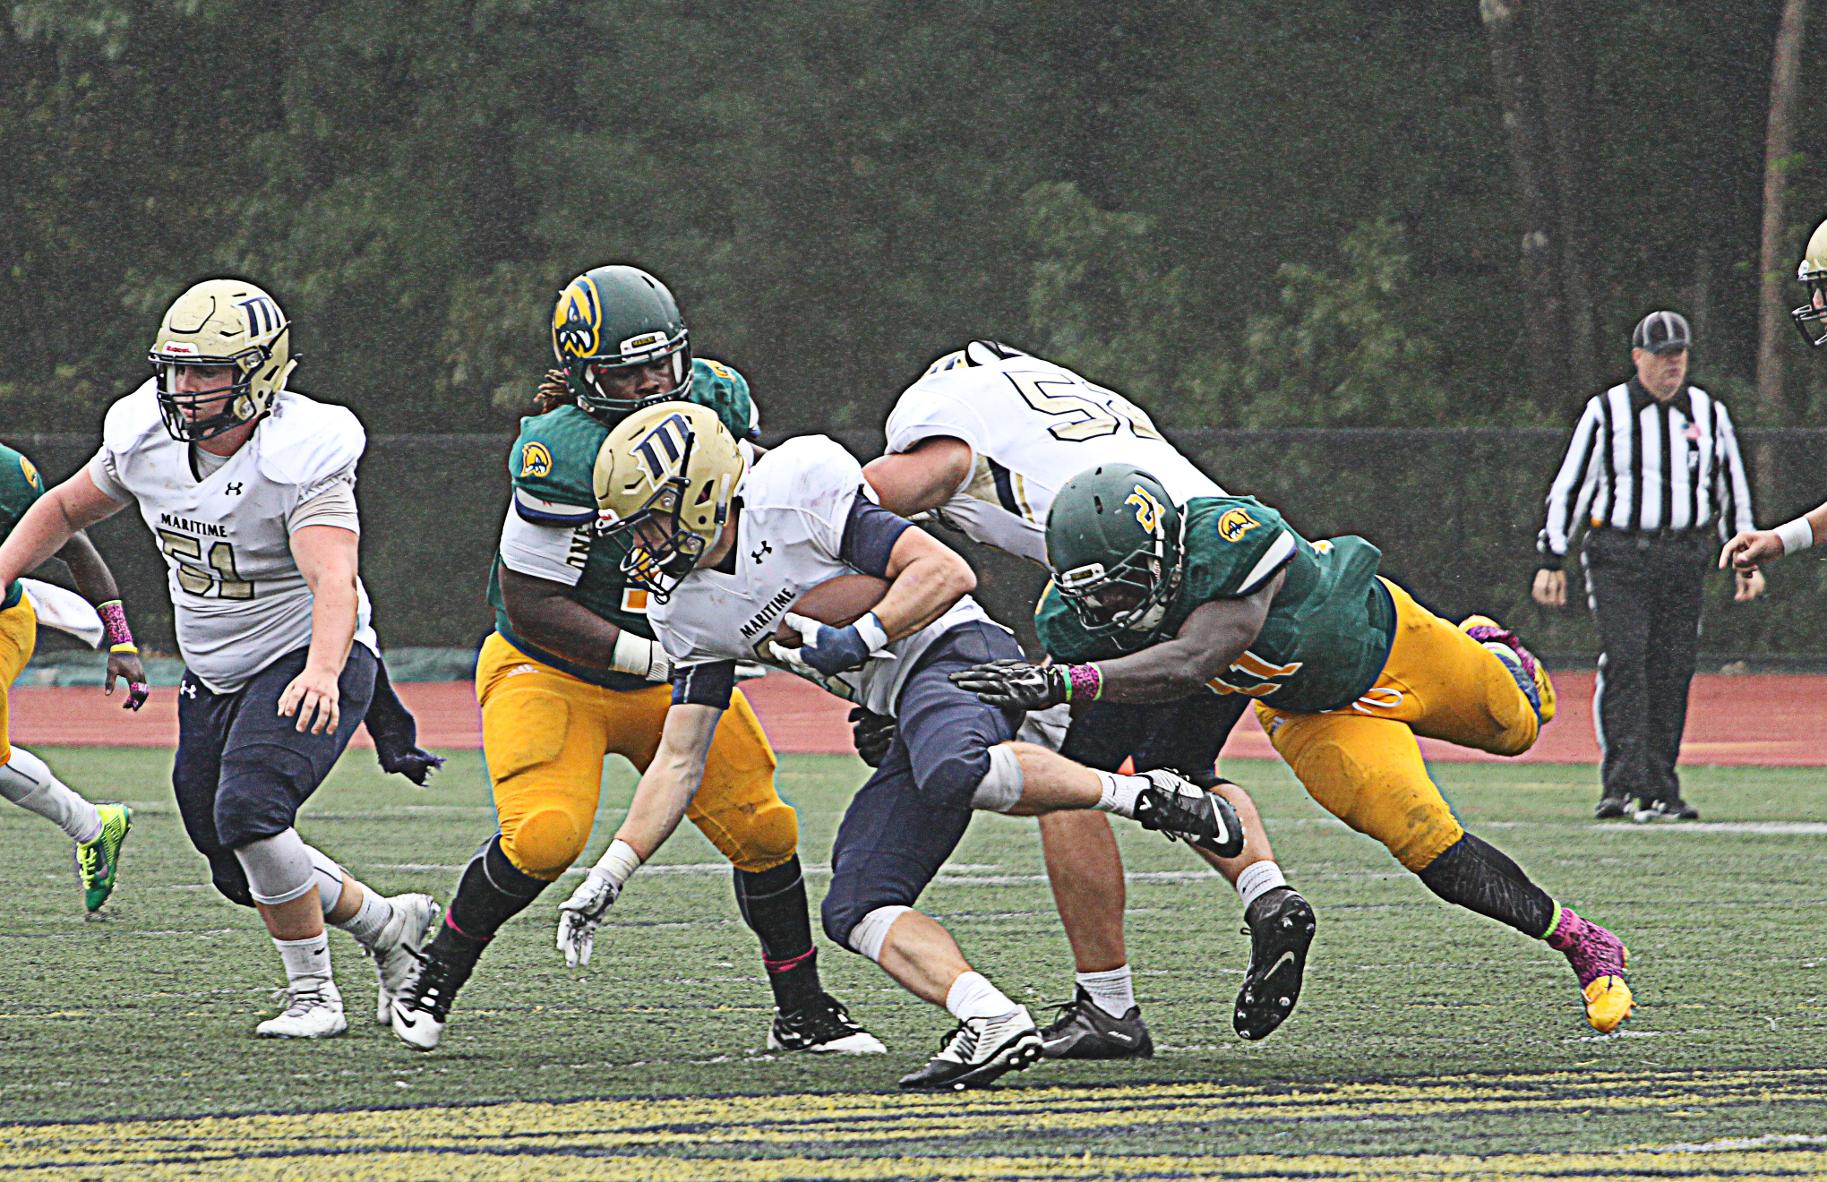 Mass. Maritime Pushes Past Fitchburg State, 30-0